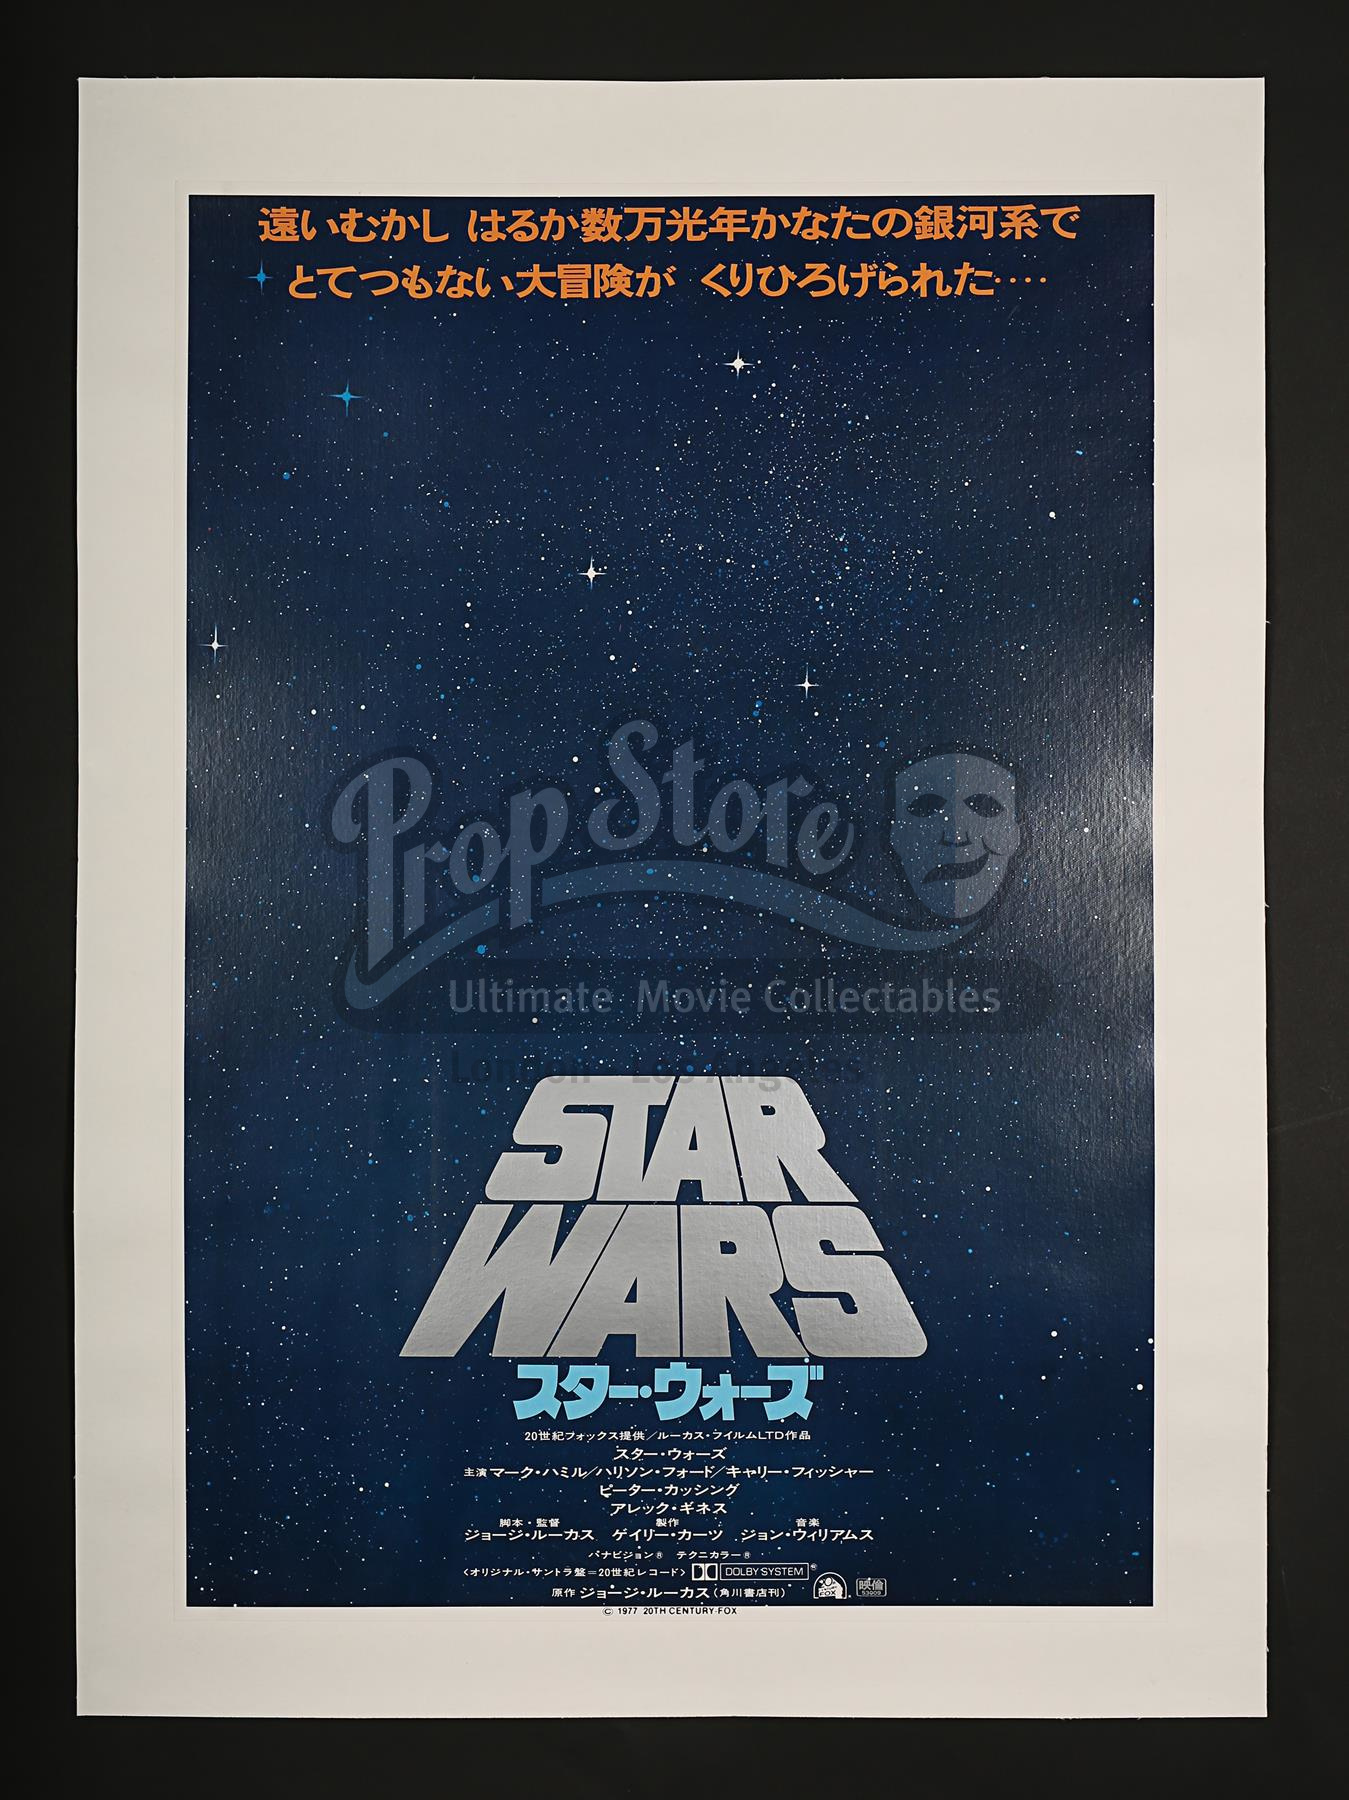 STAR WARS: A NEW HOPE (1977) - Japanese B2 Advance Poster (1977) - Current  price: £375